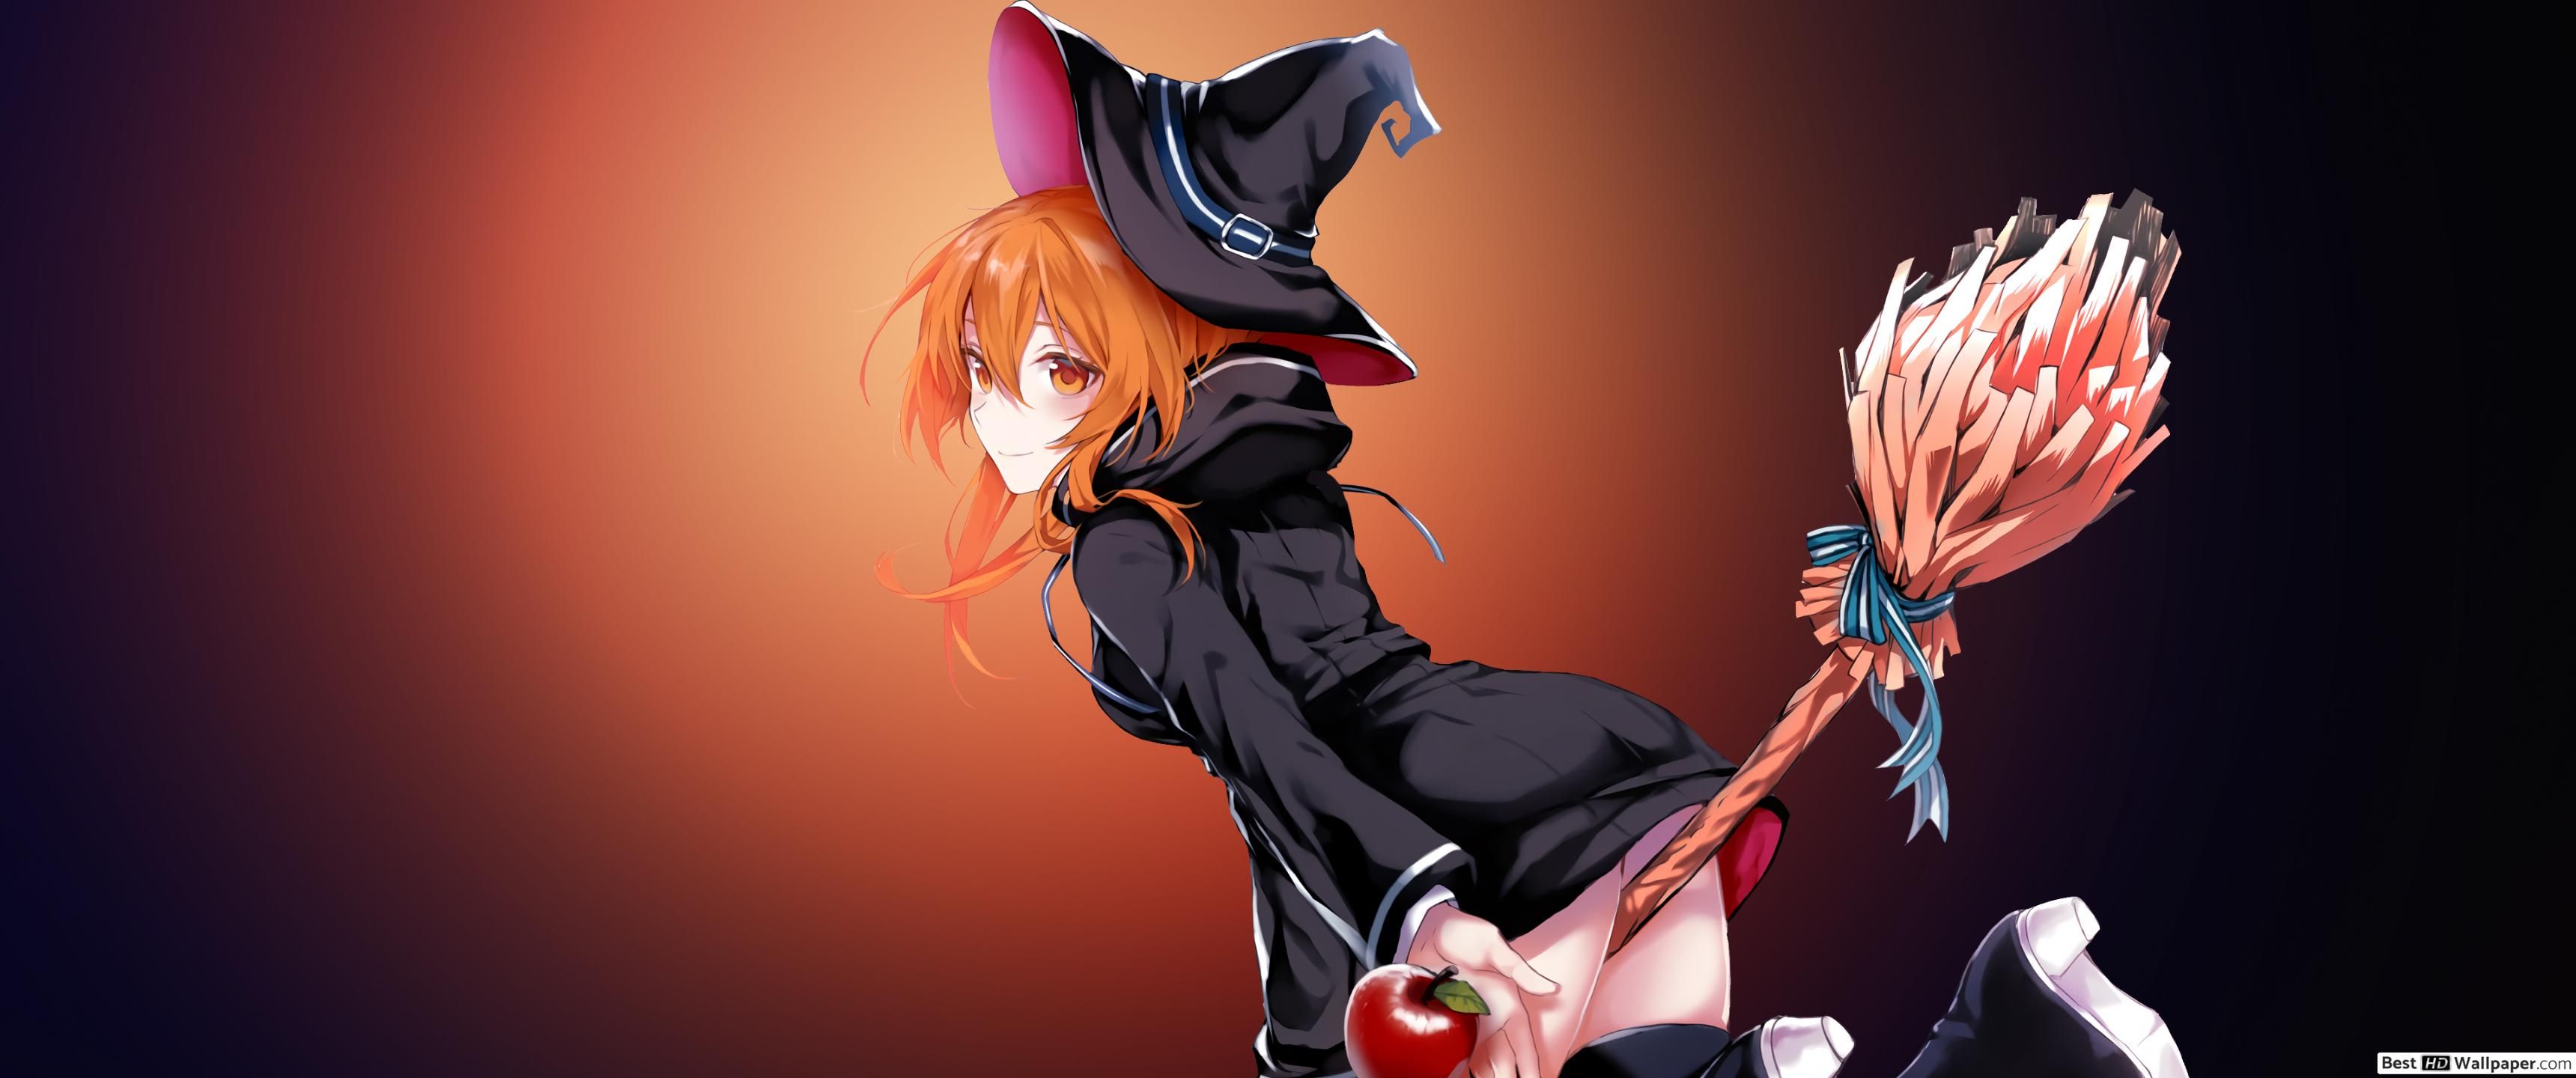 Witch Girl Anime HD wallpaper download